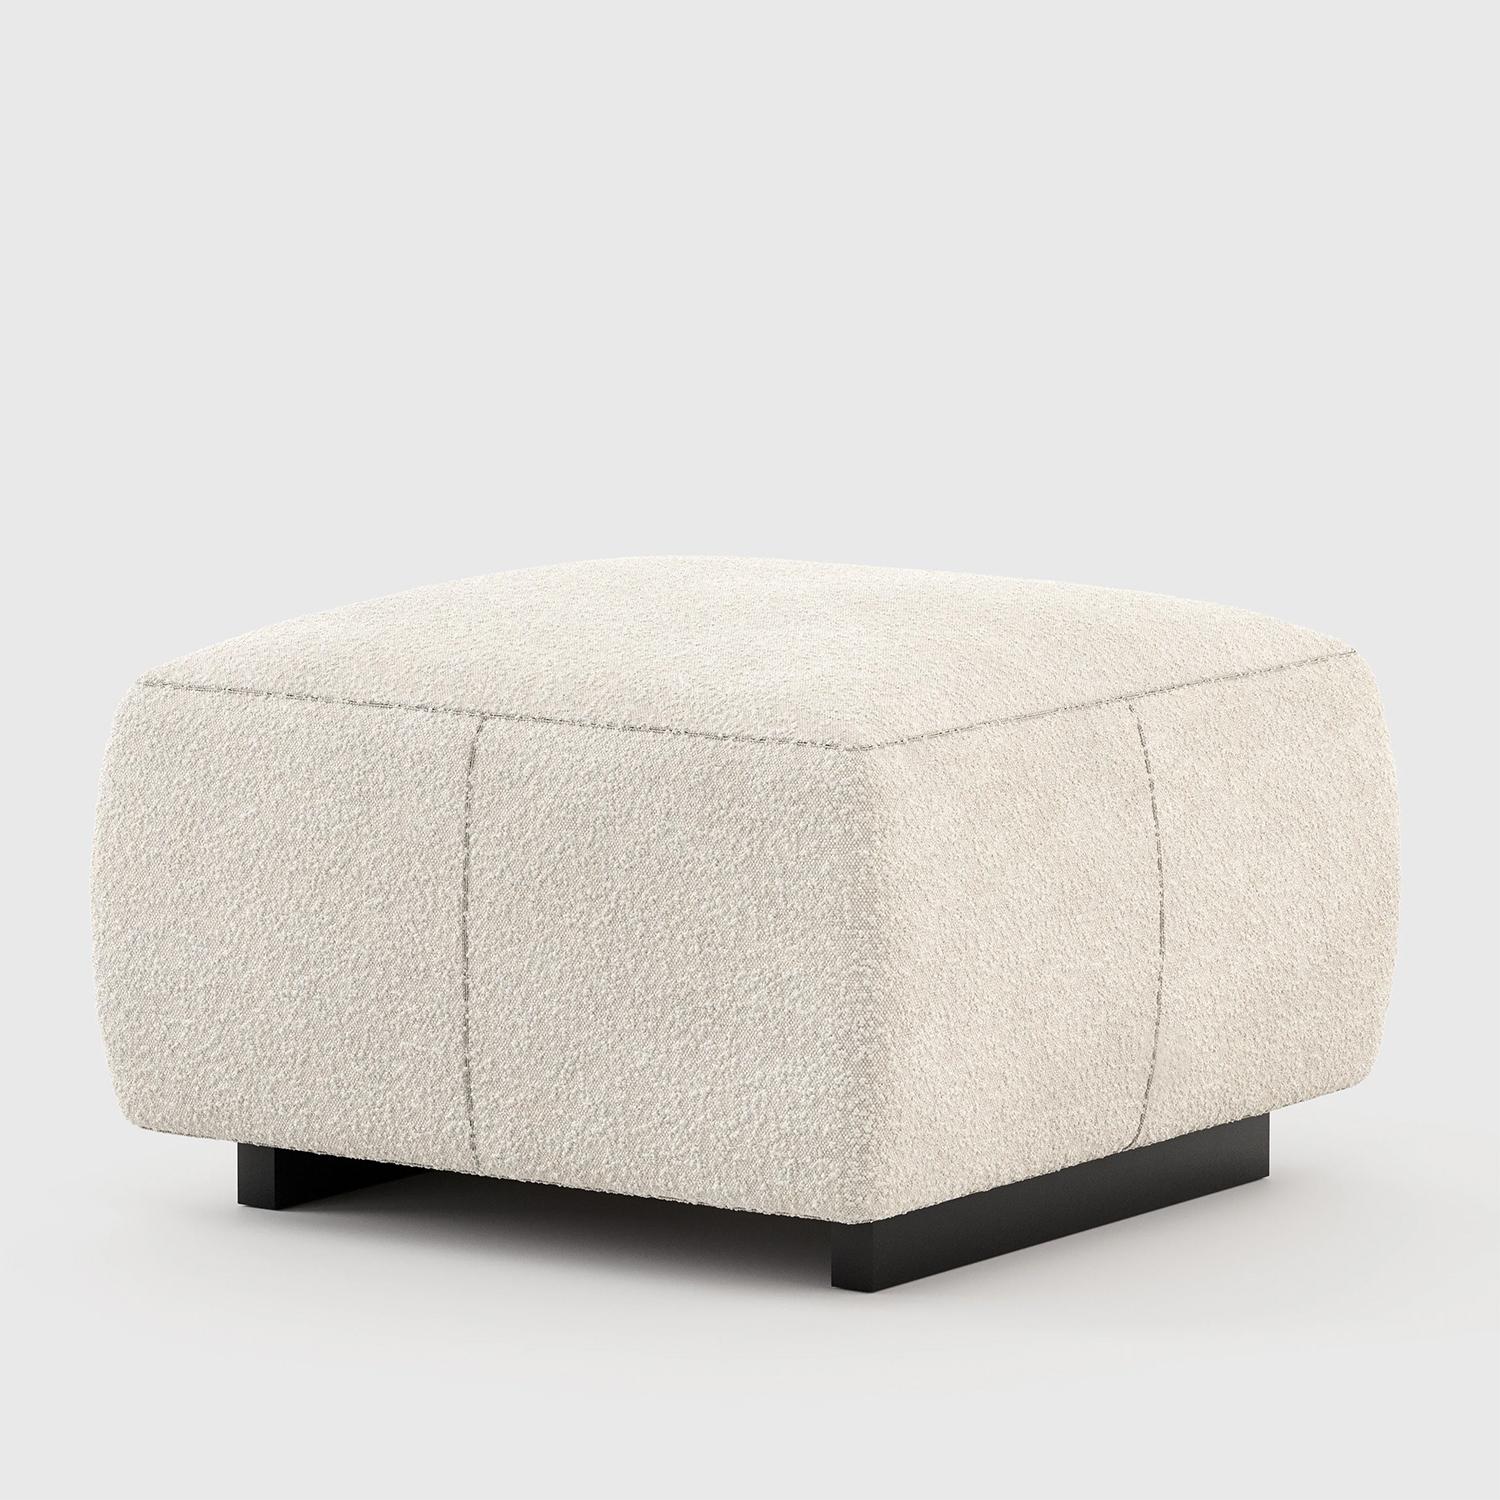 Pouf Nucci with wooden structure, upholstered and
coverd with white pearled fabric and with 2 feet base
in blackened steel.
Also available with other fabrics or leather, on request.